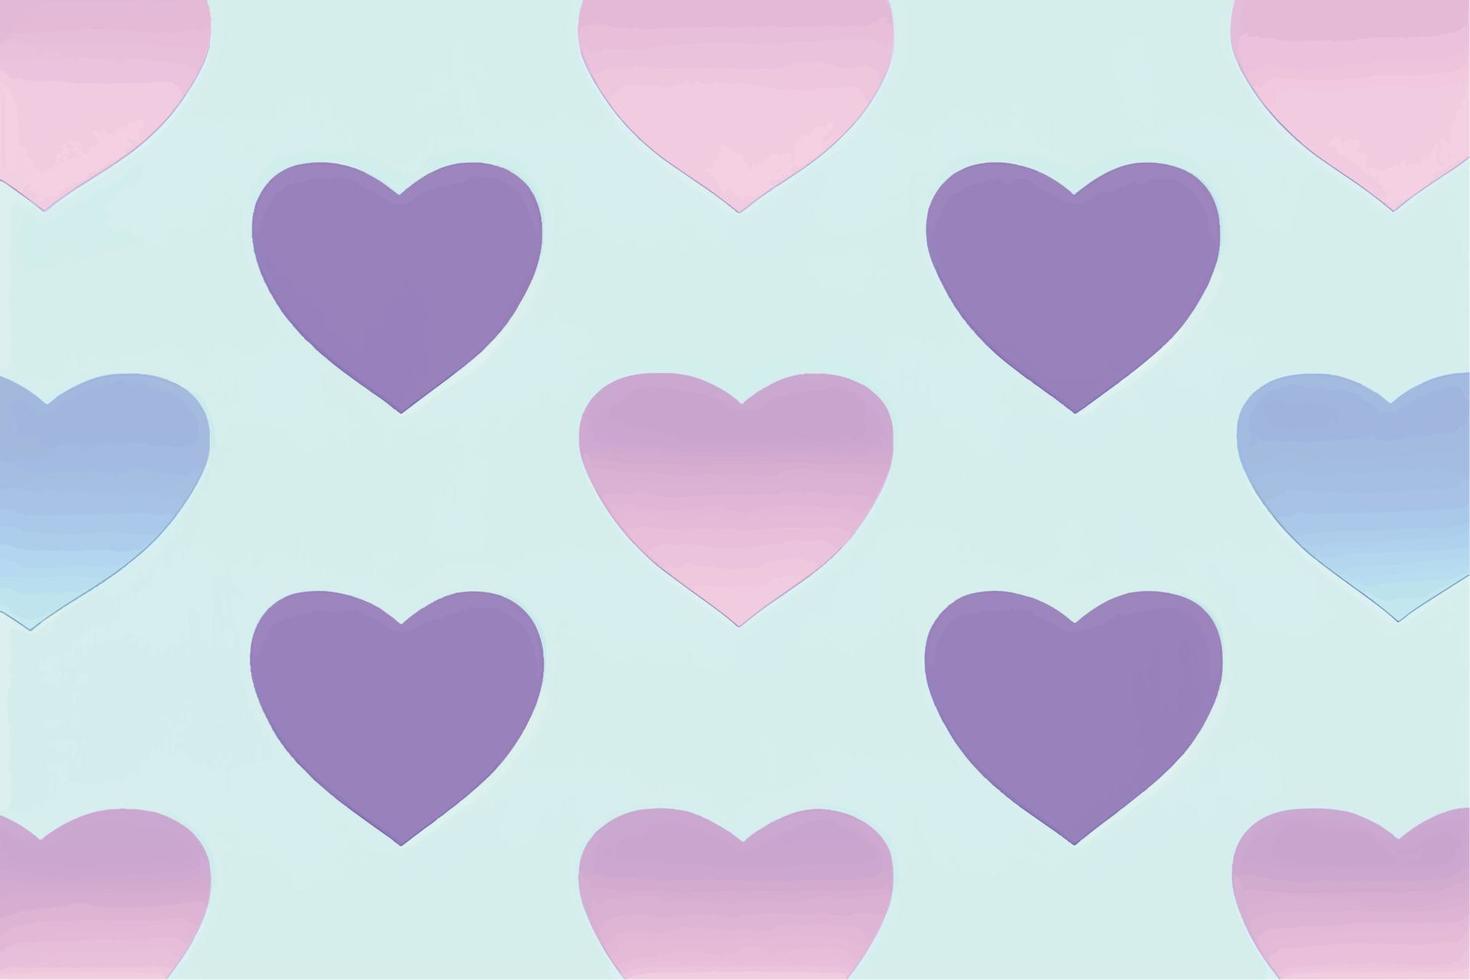 Pastel background with hearts vector